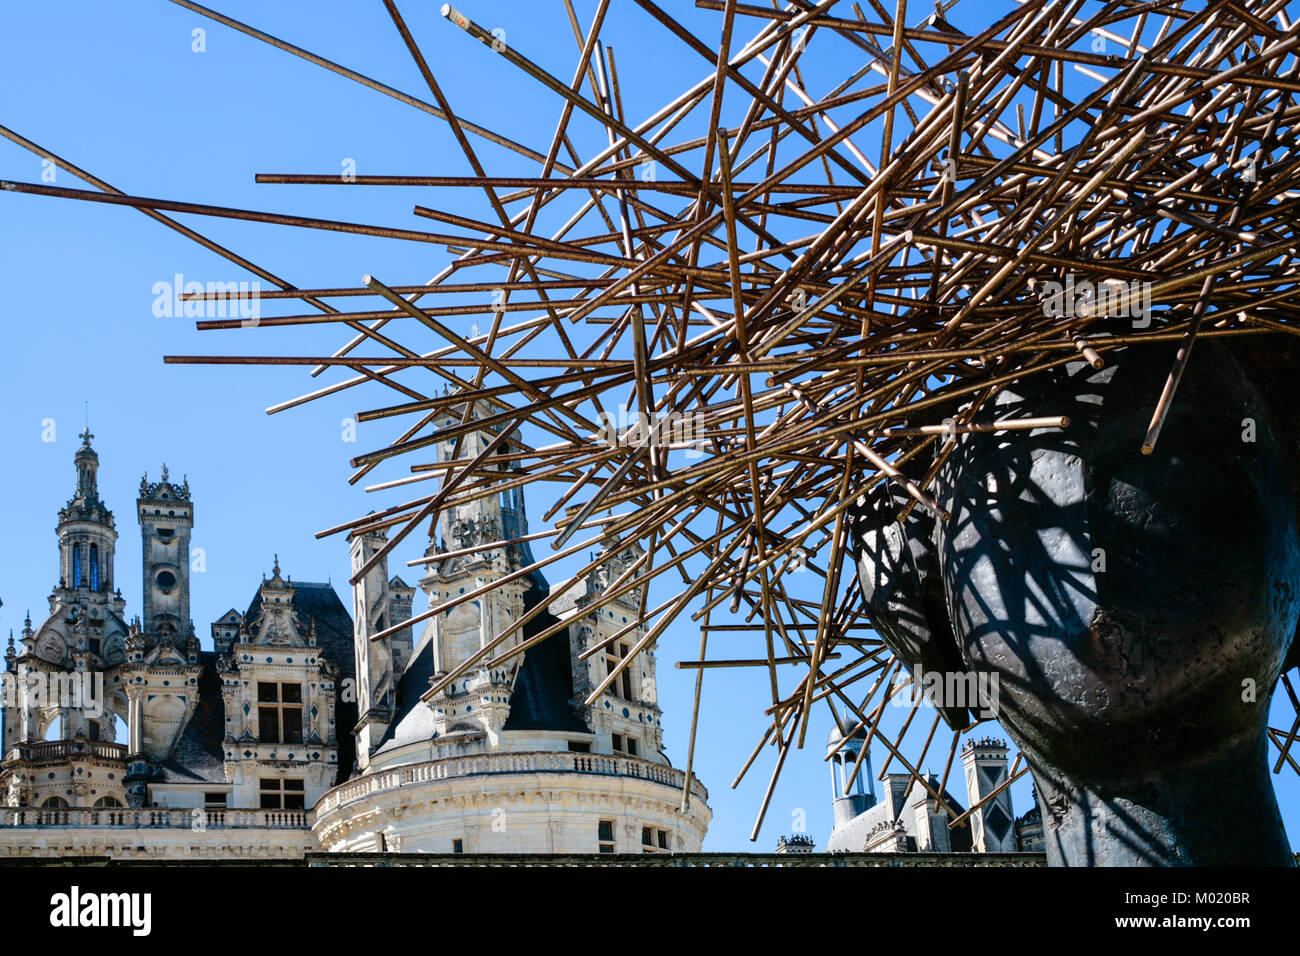 CHAMBORD, FRANCE - JULY 7, 2010: modern sculpture near castle Chateau de Chambord. Chambord is the largest chateau in the Loire Valley, it was built a Stock Photo